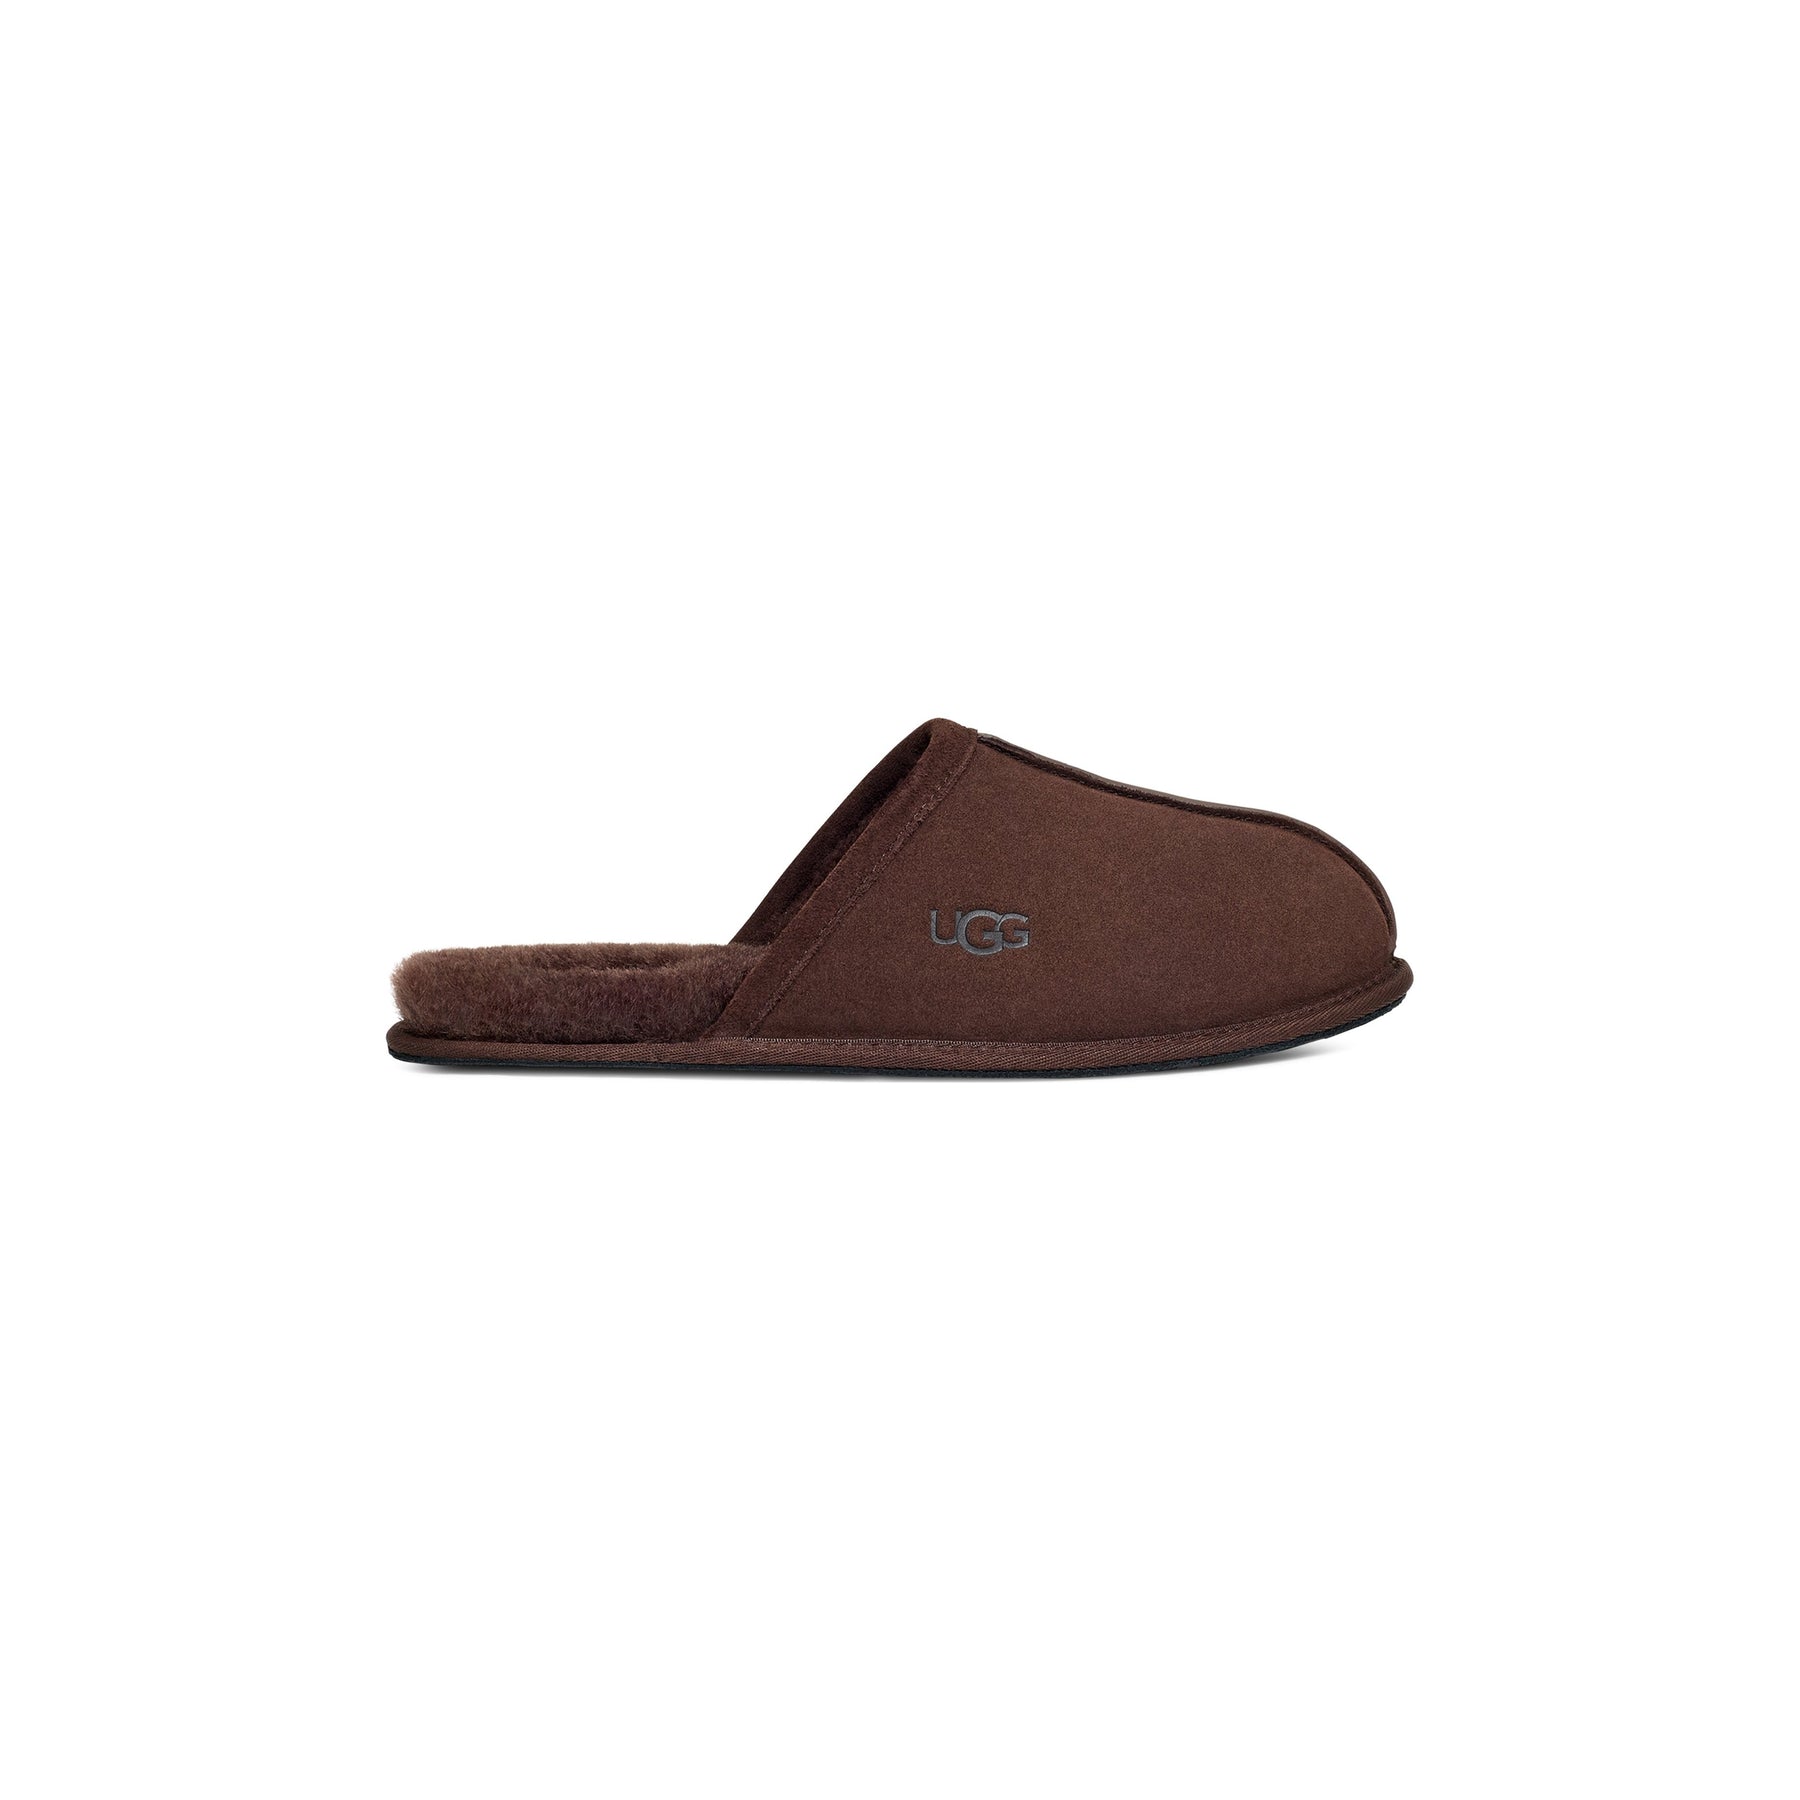 UGG Men's Scuff in Dusted Cocoa | Footprint USA